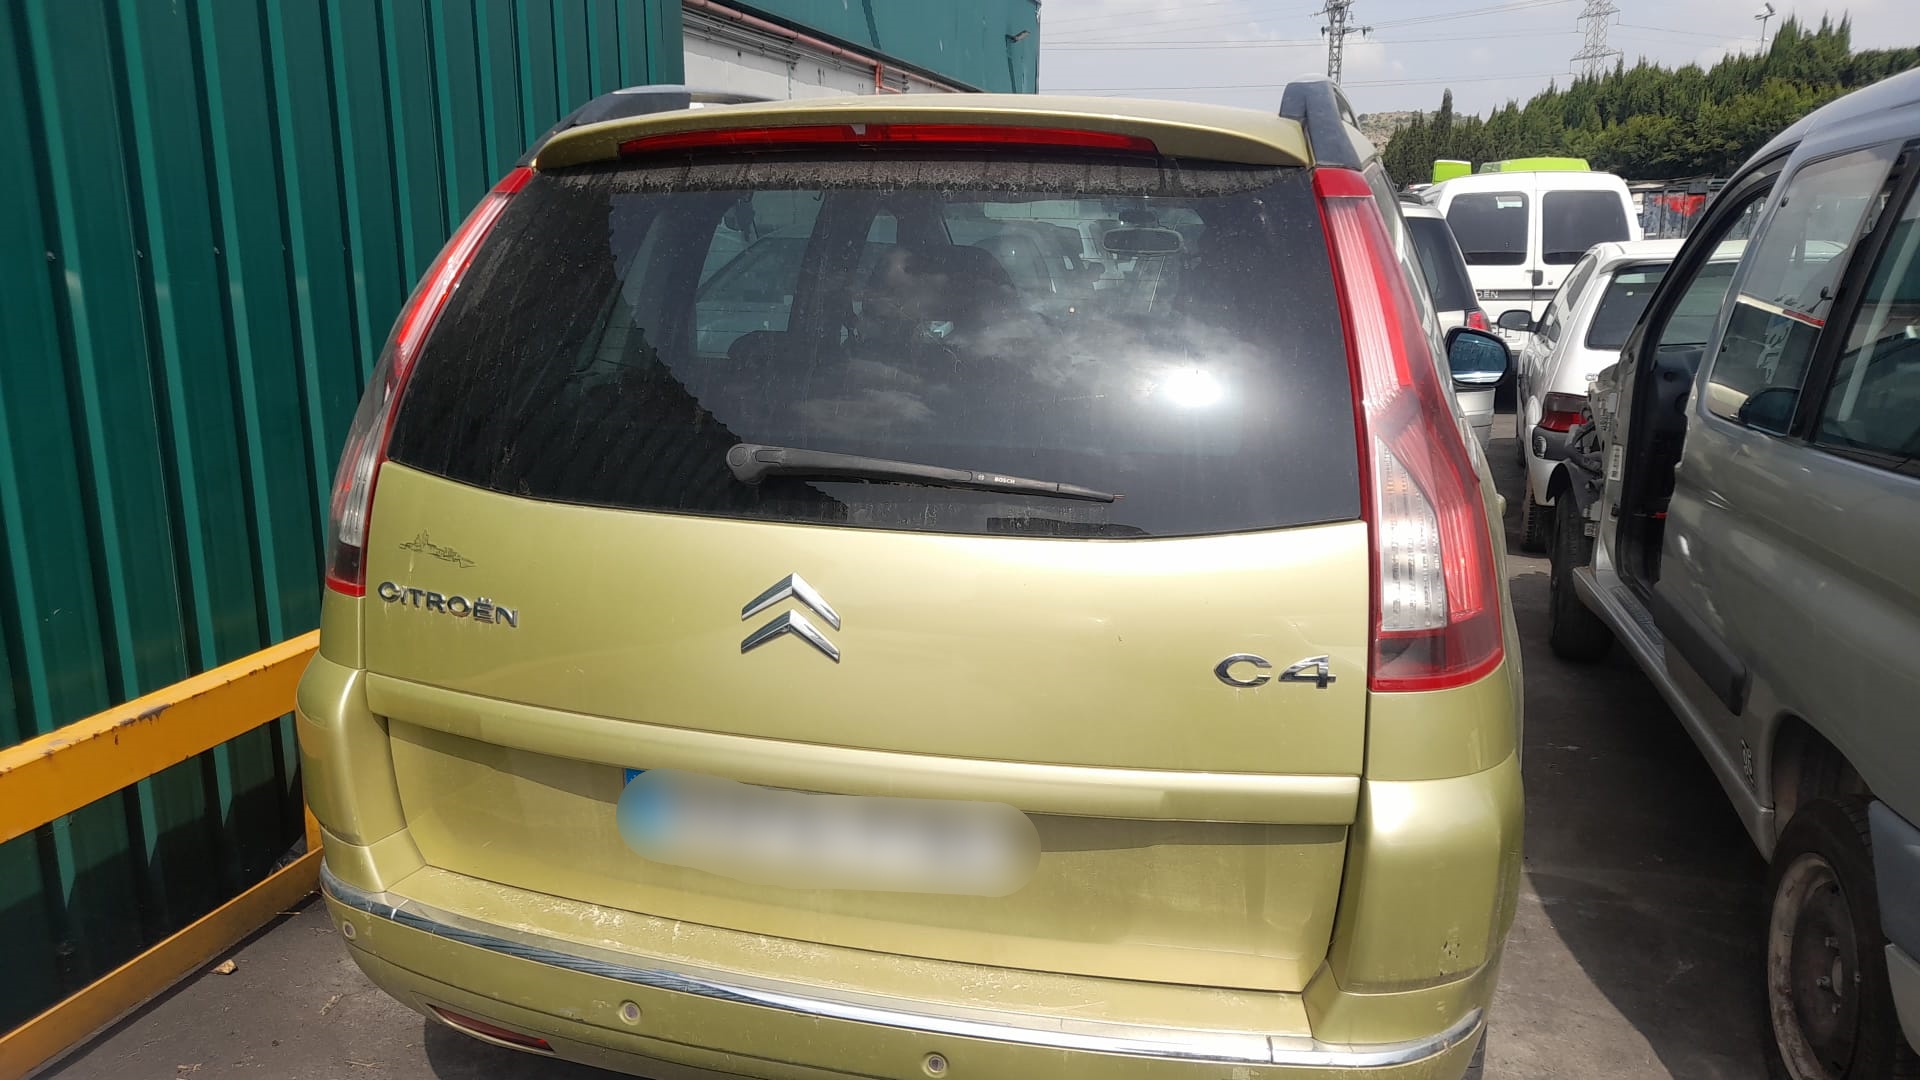 CITROËN C4 Picasso 1 generation (2006-2013) Tелевизор 7104EY 18568954